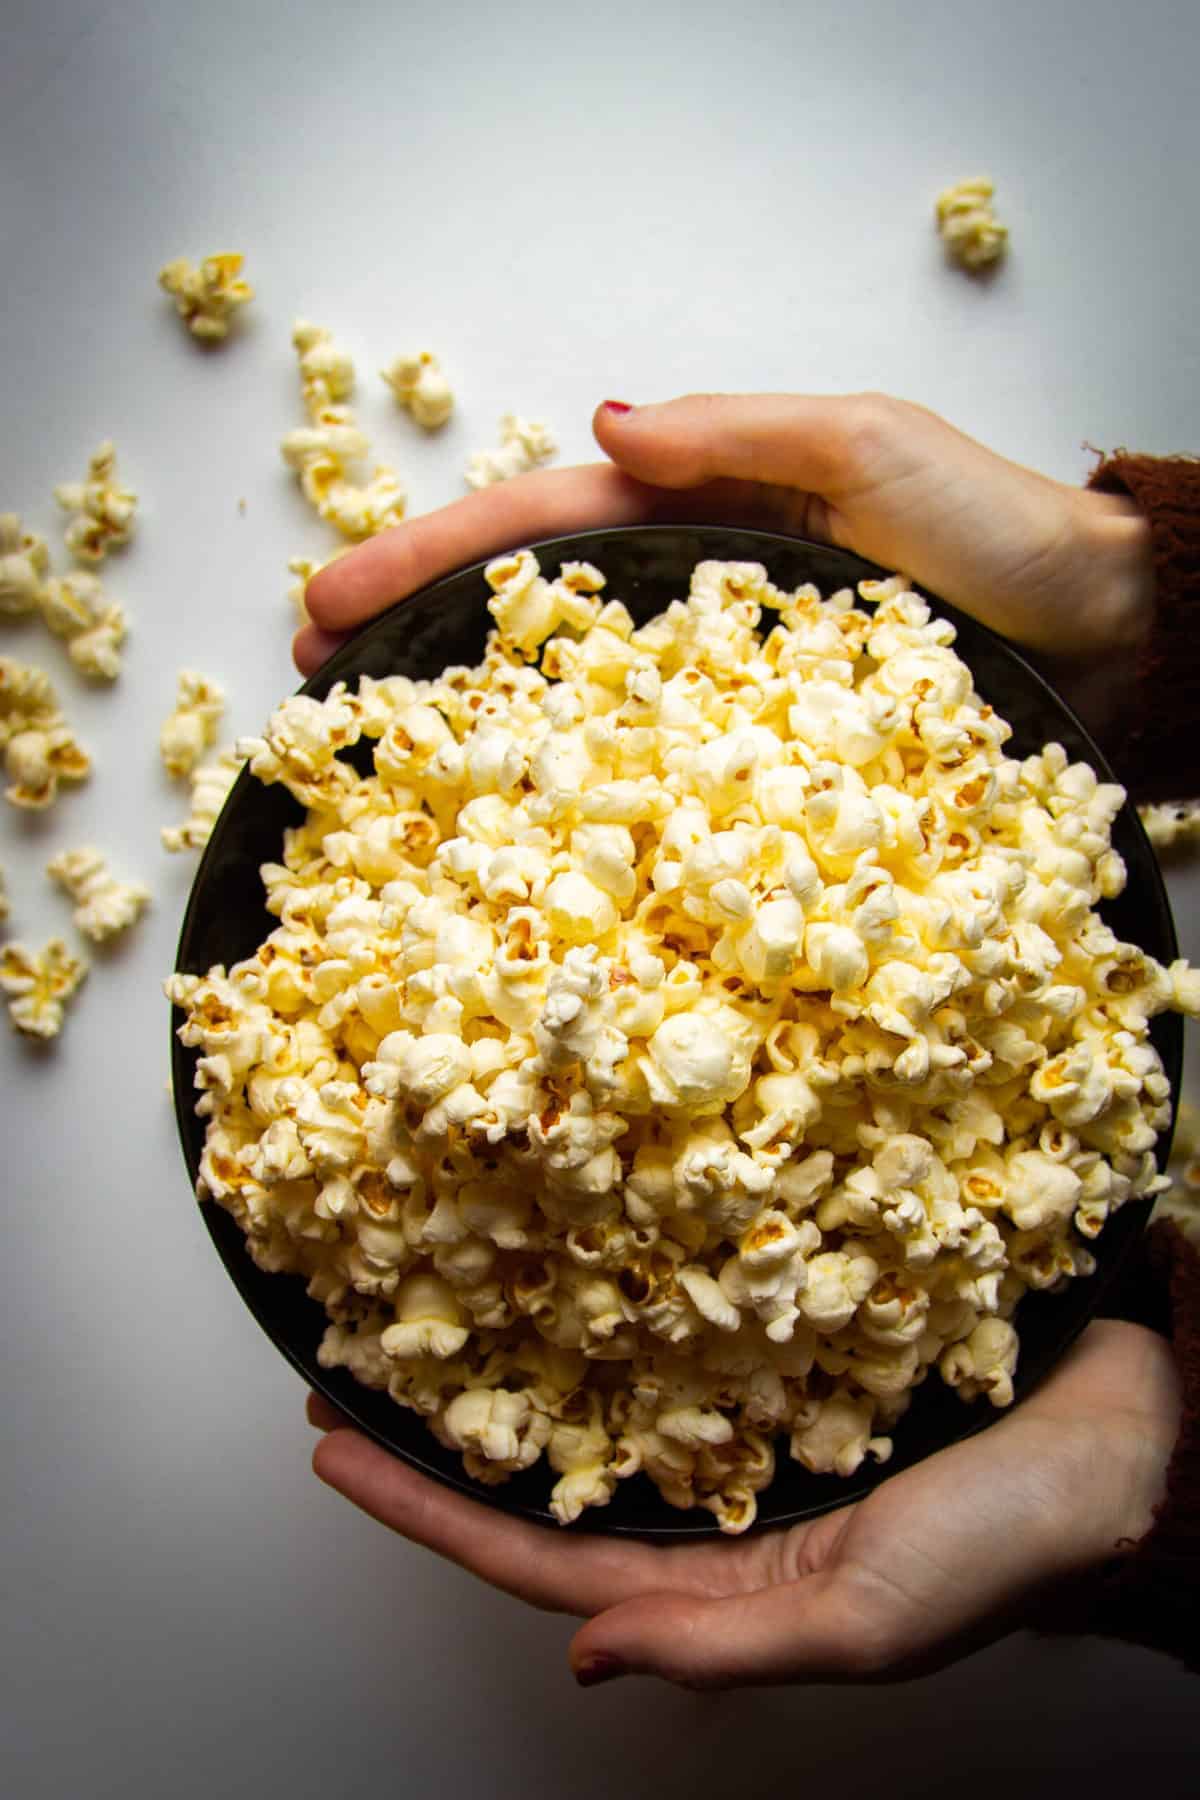 Buttery stovetop popcorn in a bowl being held by two hands.